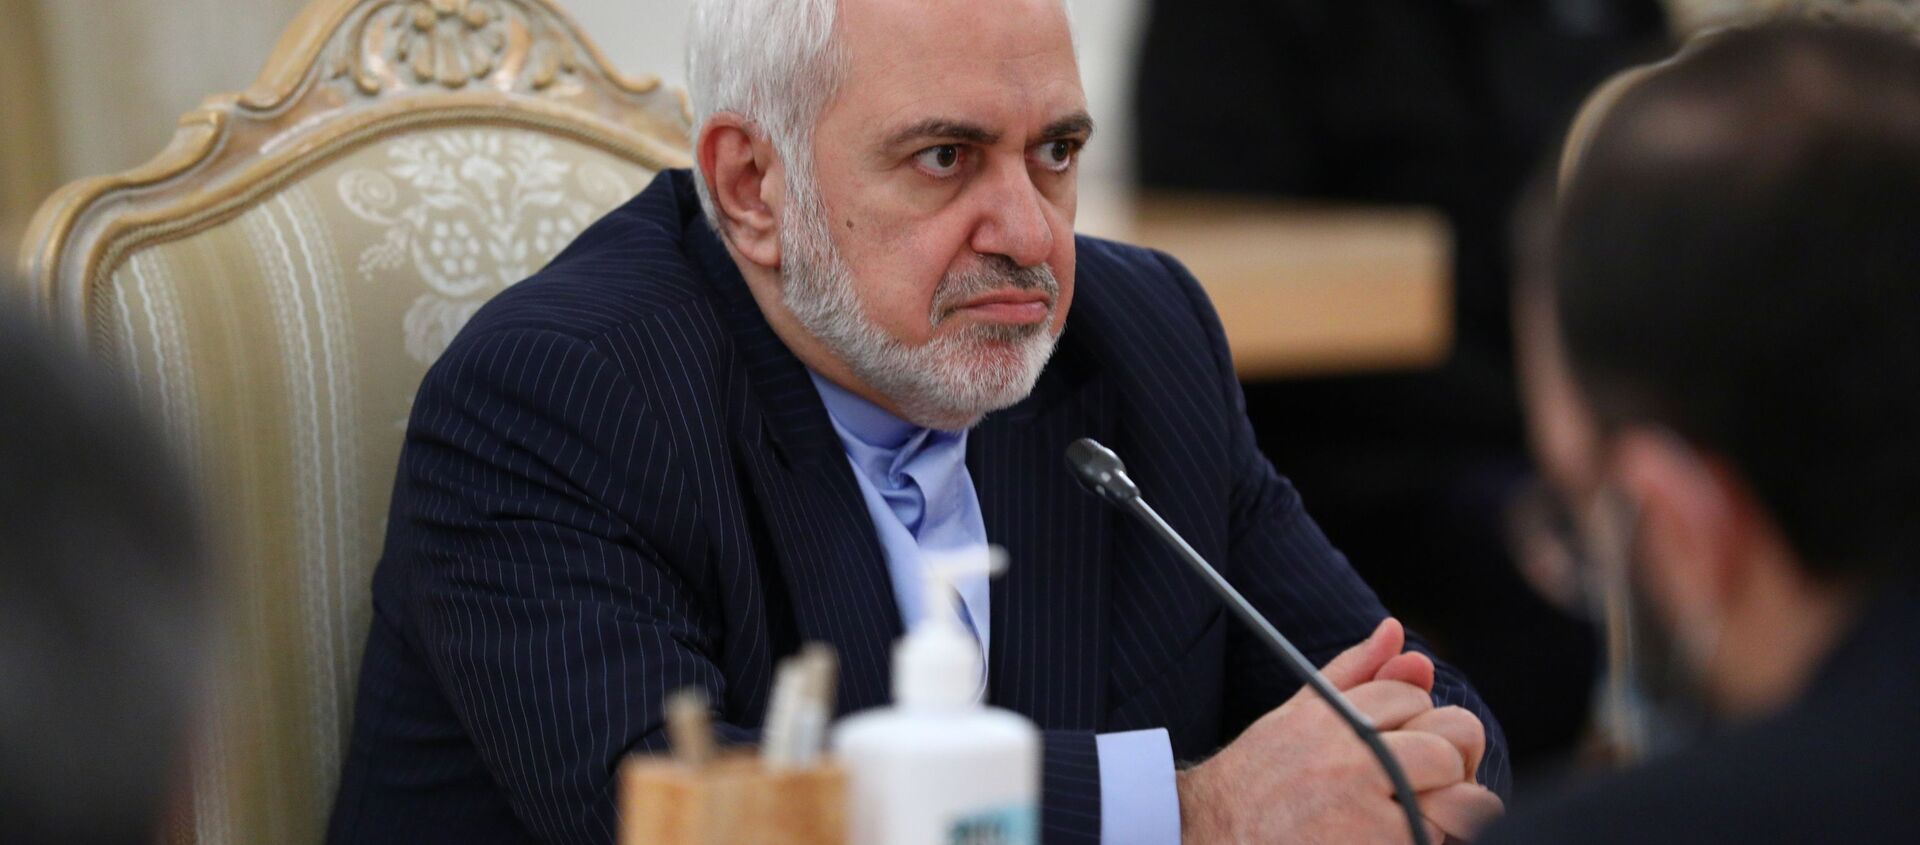 Iran's Foreign Minister Mohammad Javad Zarif attends a meeting with Russia's Foreign Minister Sergei Lavrov in Moscow, Russia January 26, 2021 - Sputnik International, 1920, 27.01.2021